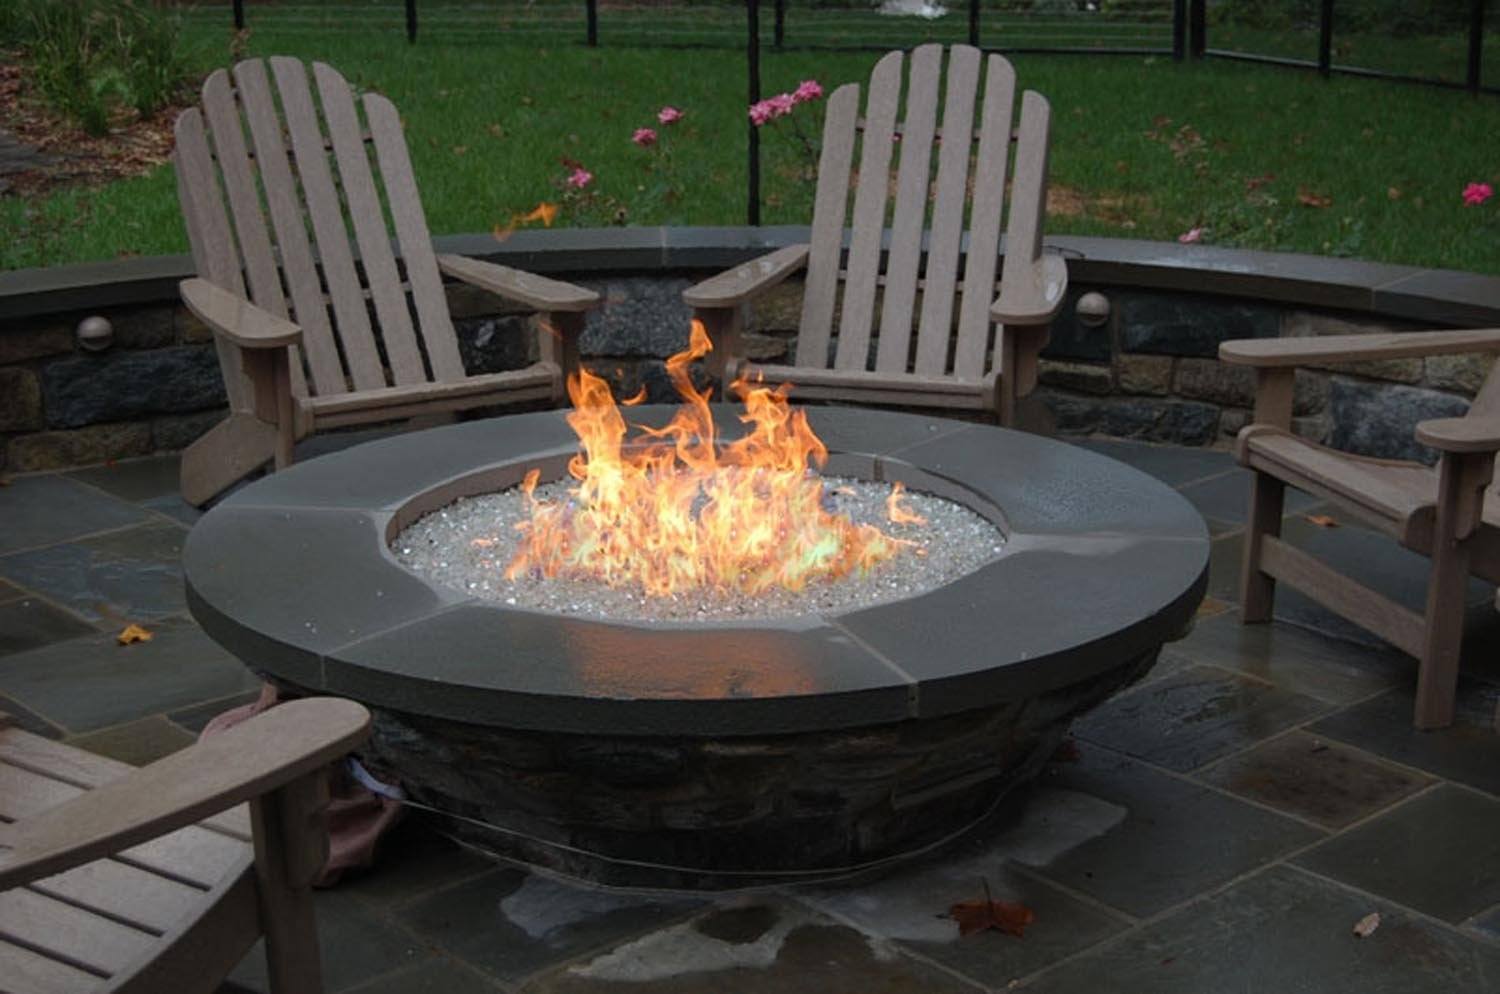 Gas Vs Wood Fire Pit Pros And Cons, Natural Gas Deck Fire Pit